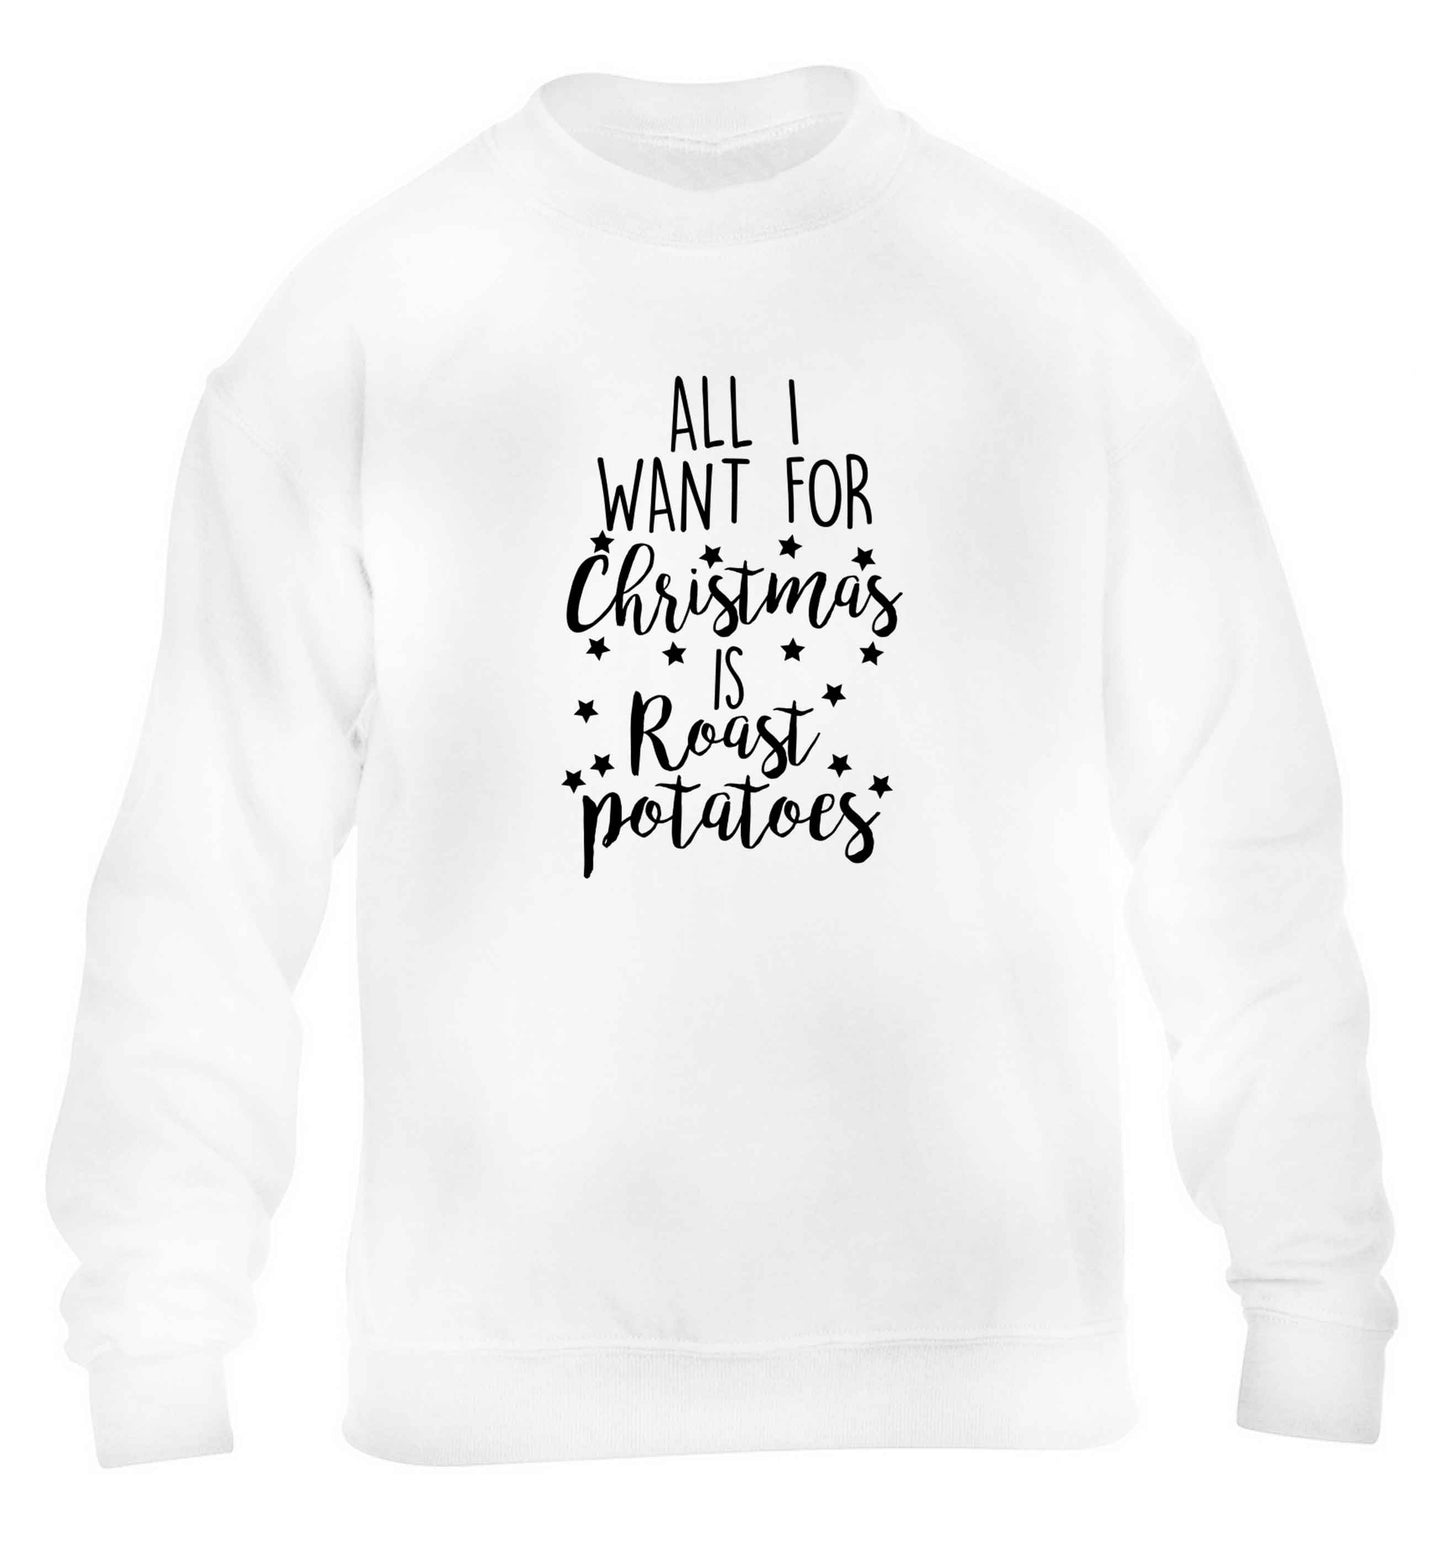 All I want for Christmas is roast potatoes children's white sweater 12-13 Years